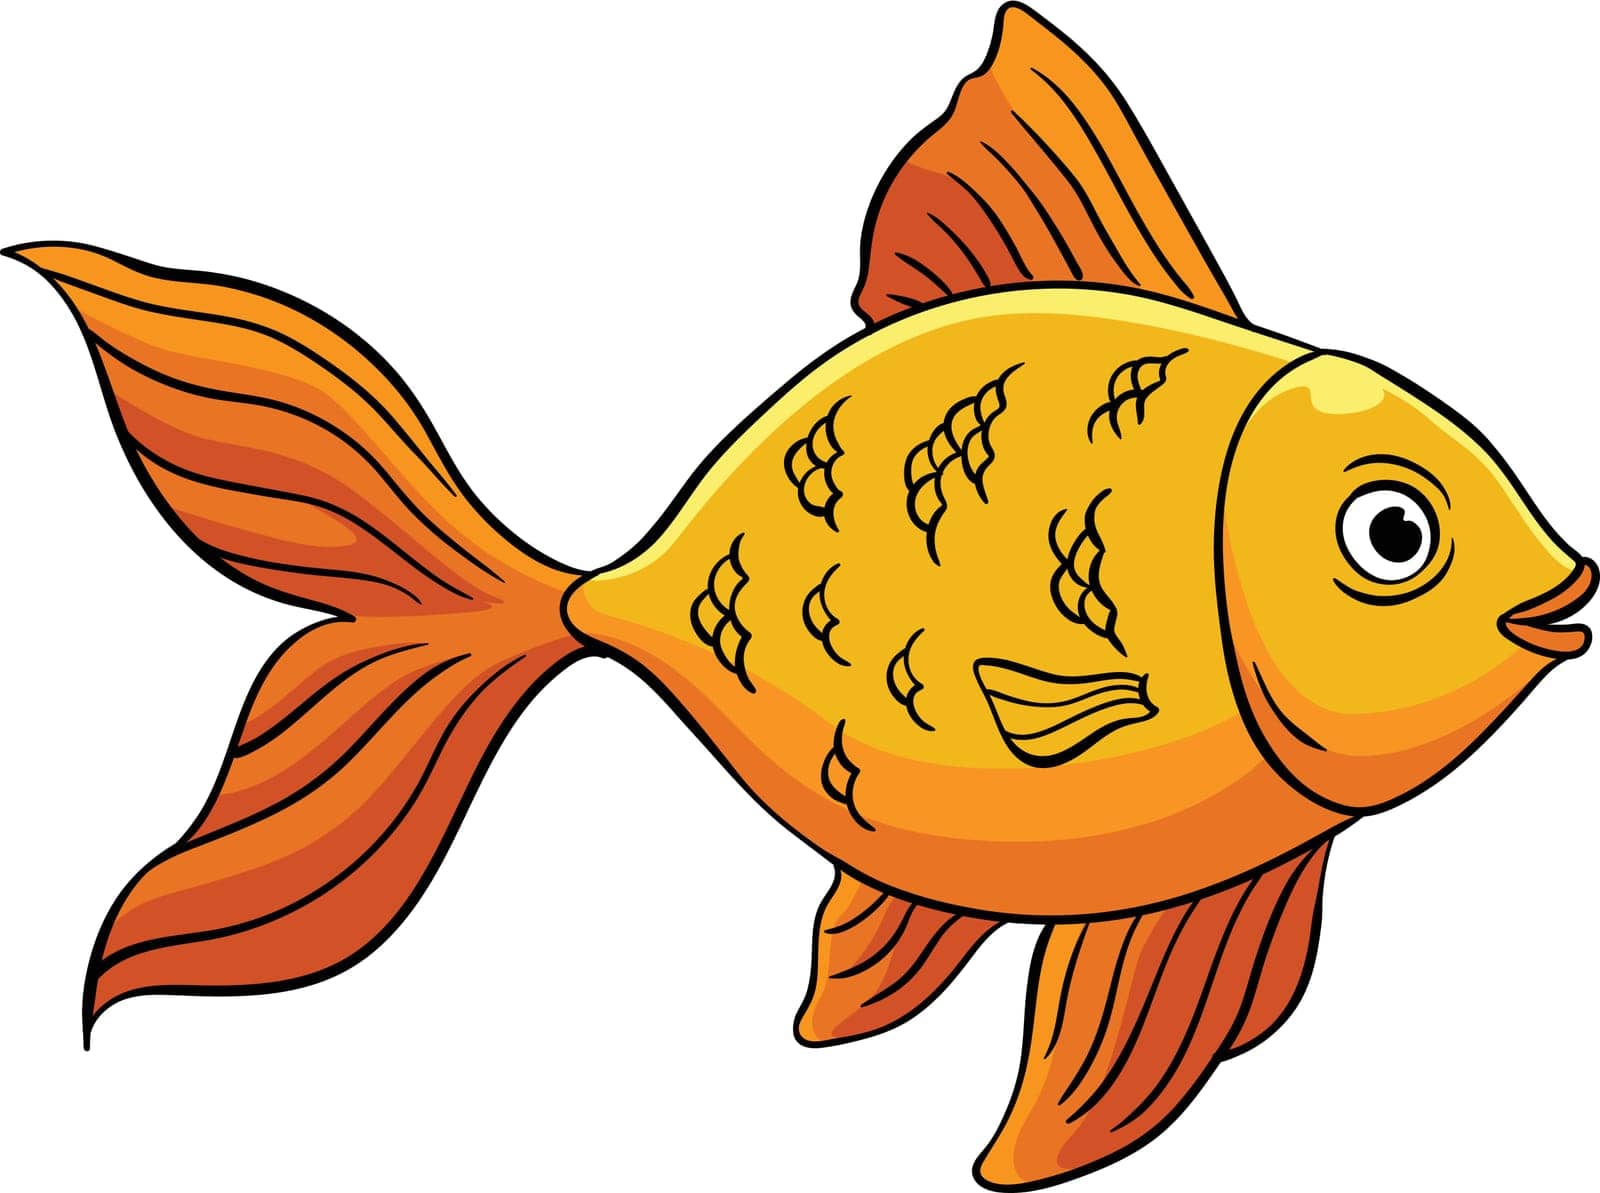 Goldfish Cartoon Colored Clipart Illustration by abbydesign